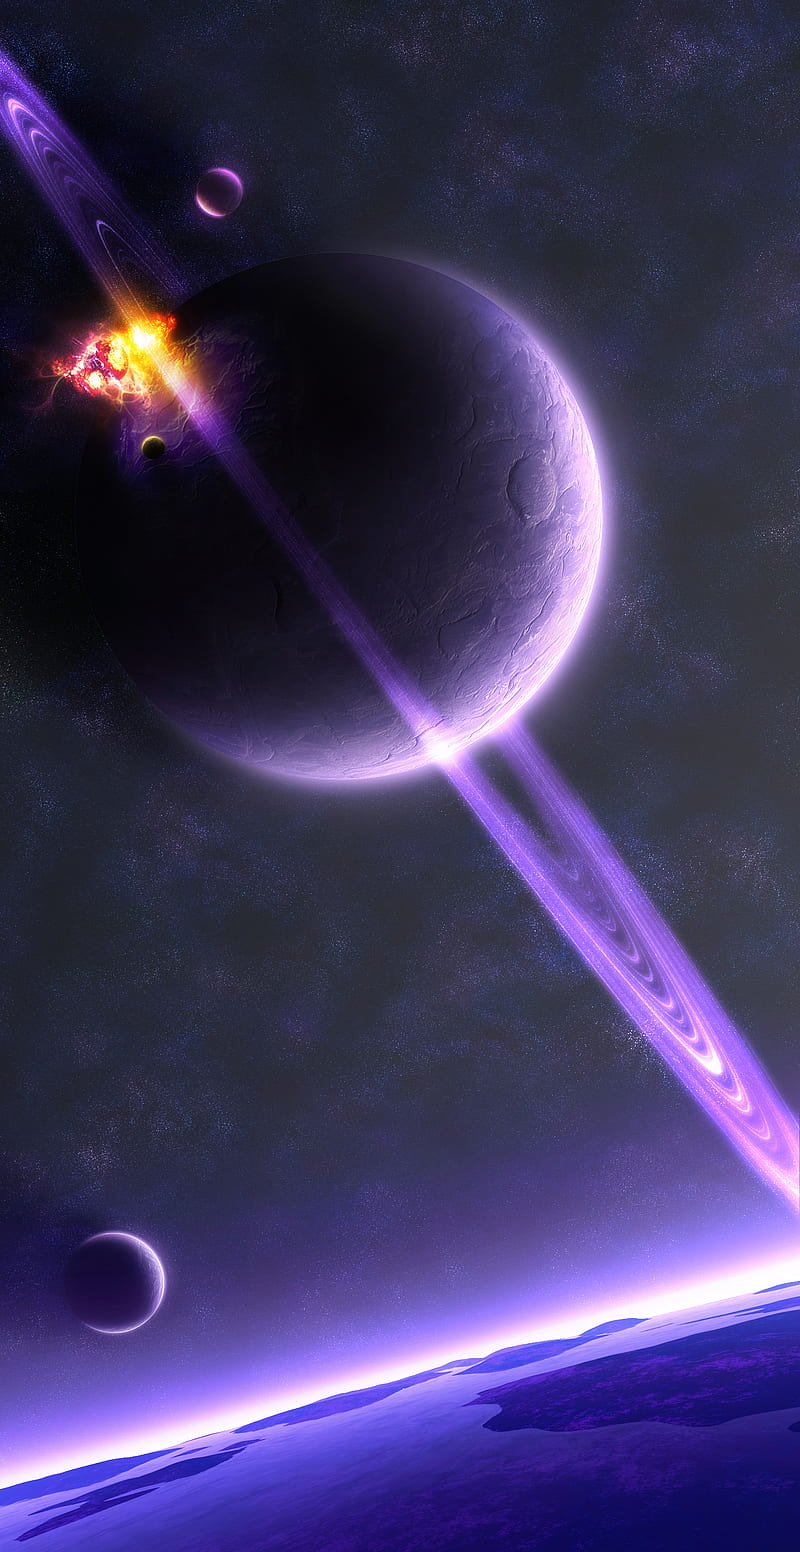 Details more than 66 saturn iphone wallpaper - in.cdgdbentre